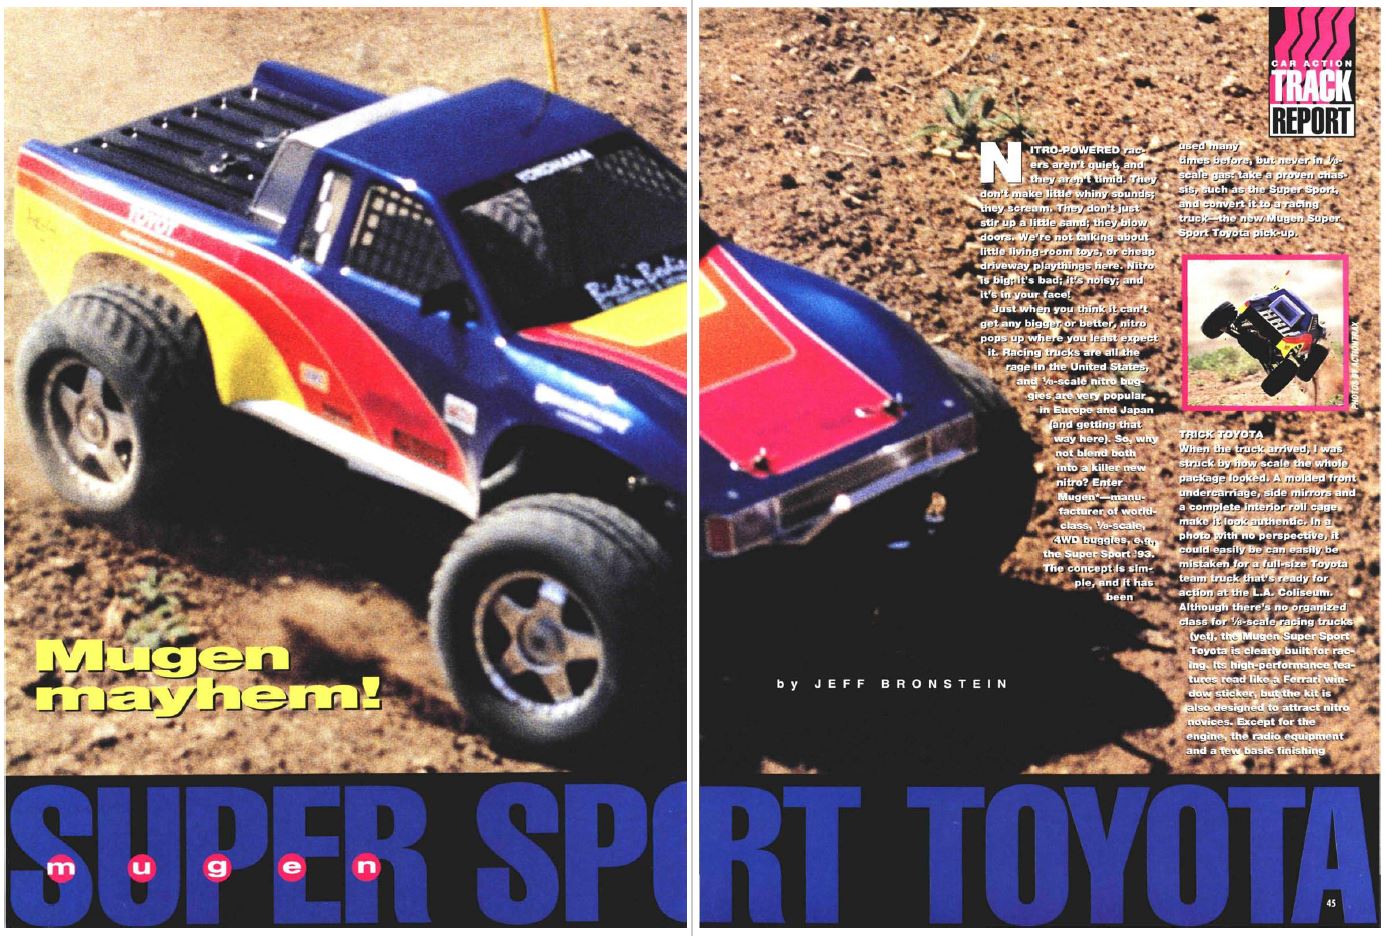 #TBT The Mugen Seiki Racing Super Sport Toyota - Reviewed in October 1993 Issue